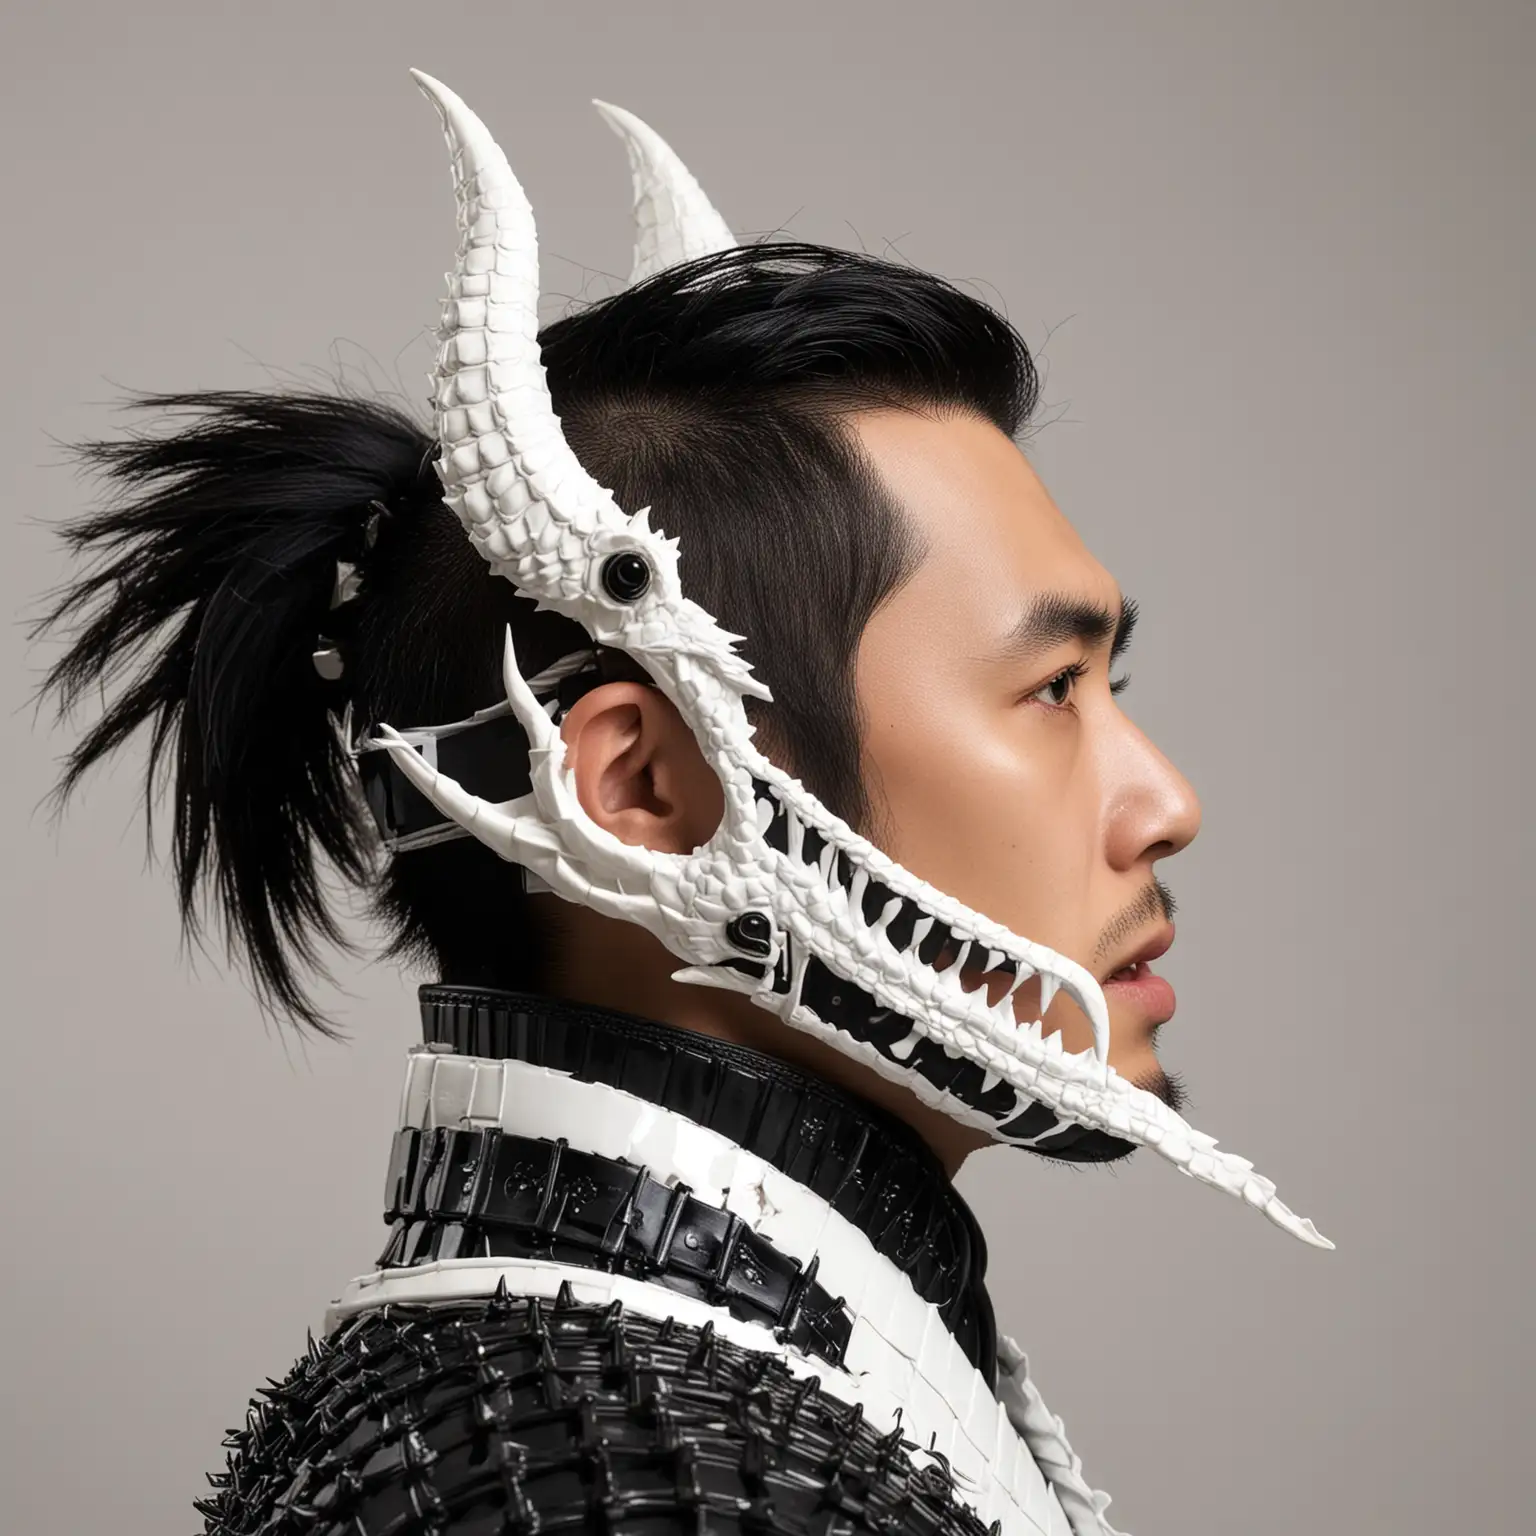 Portrait photograph, side profile view, looking to the right, Japanese man with black spiked hair wearing large plastic white dragon samurai chin-guard, black turtleneck white background